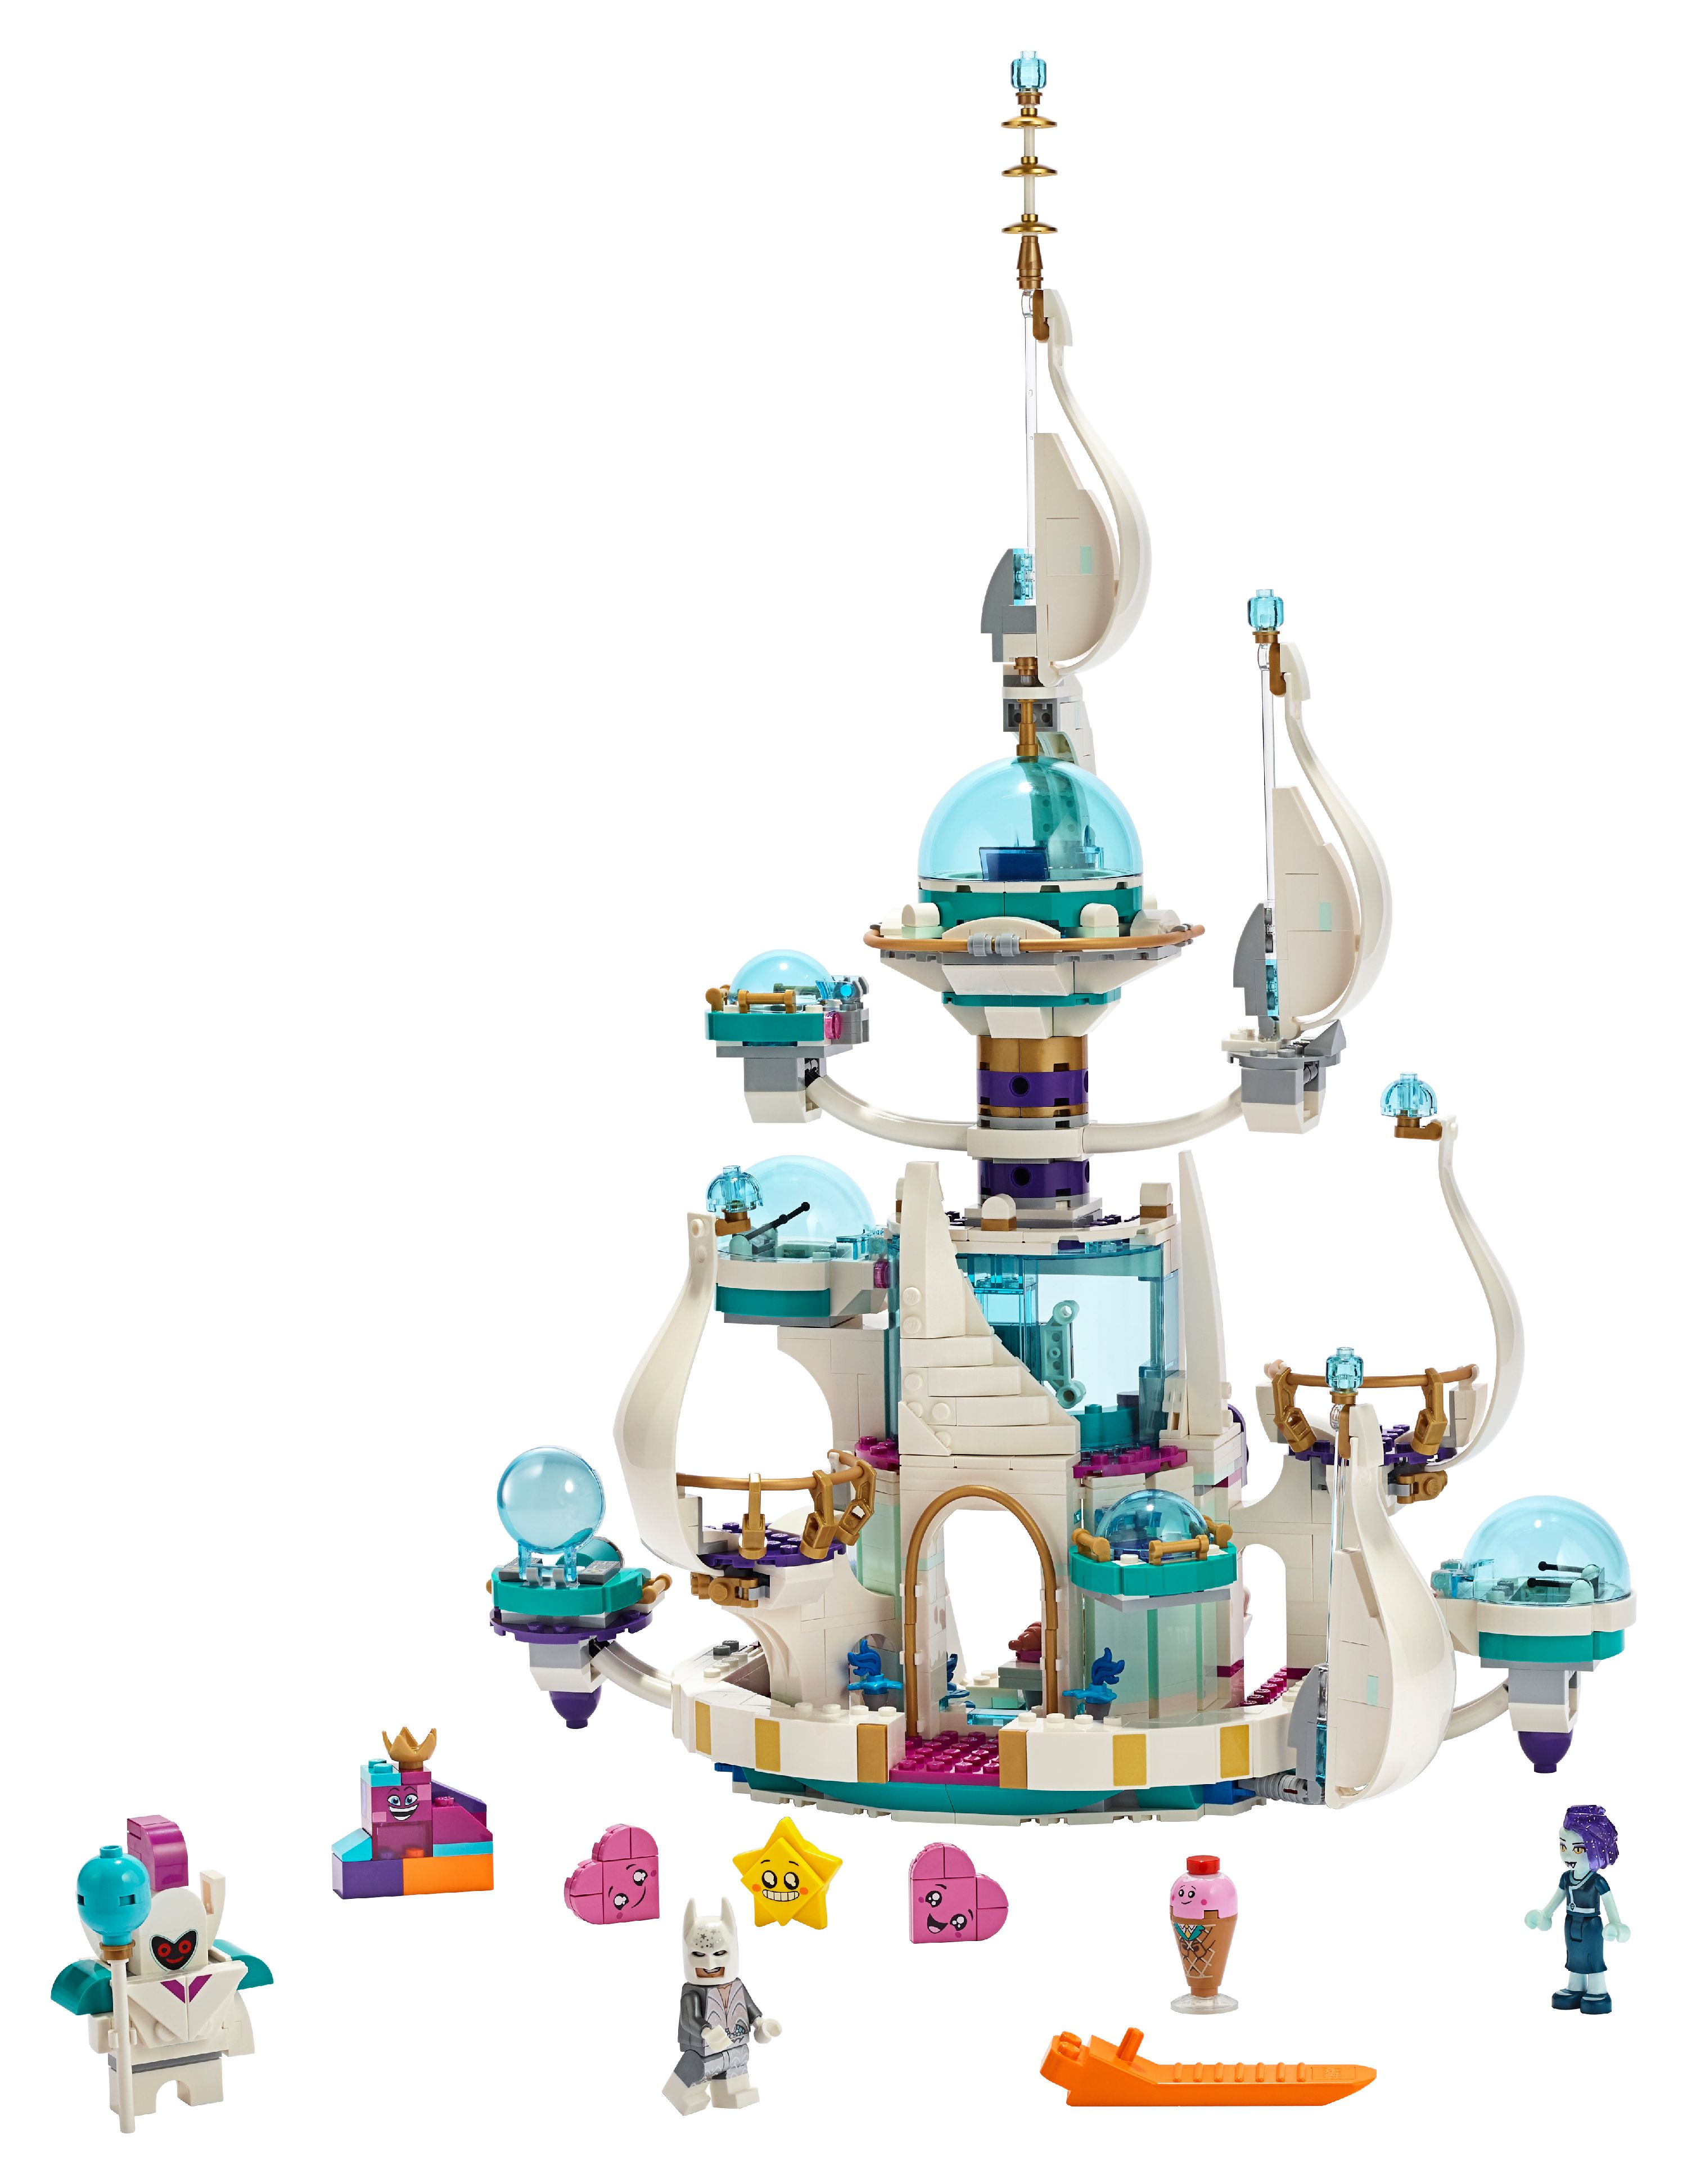 LEGO Movie Queen Watevra's So-Not-Evil' Space Pala 70838 - image 3 of 8